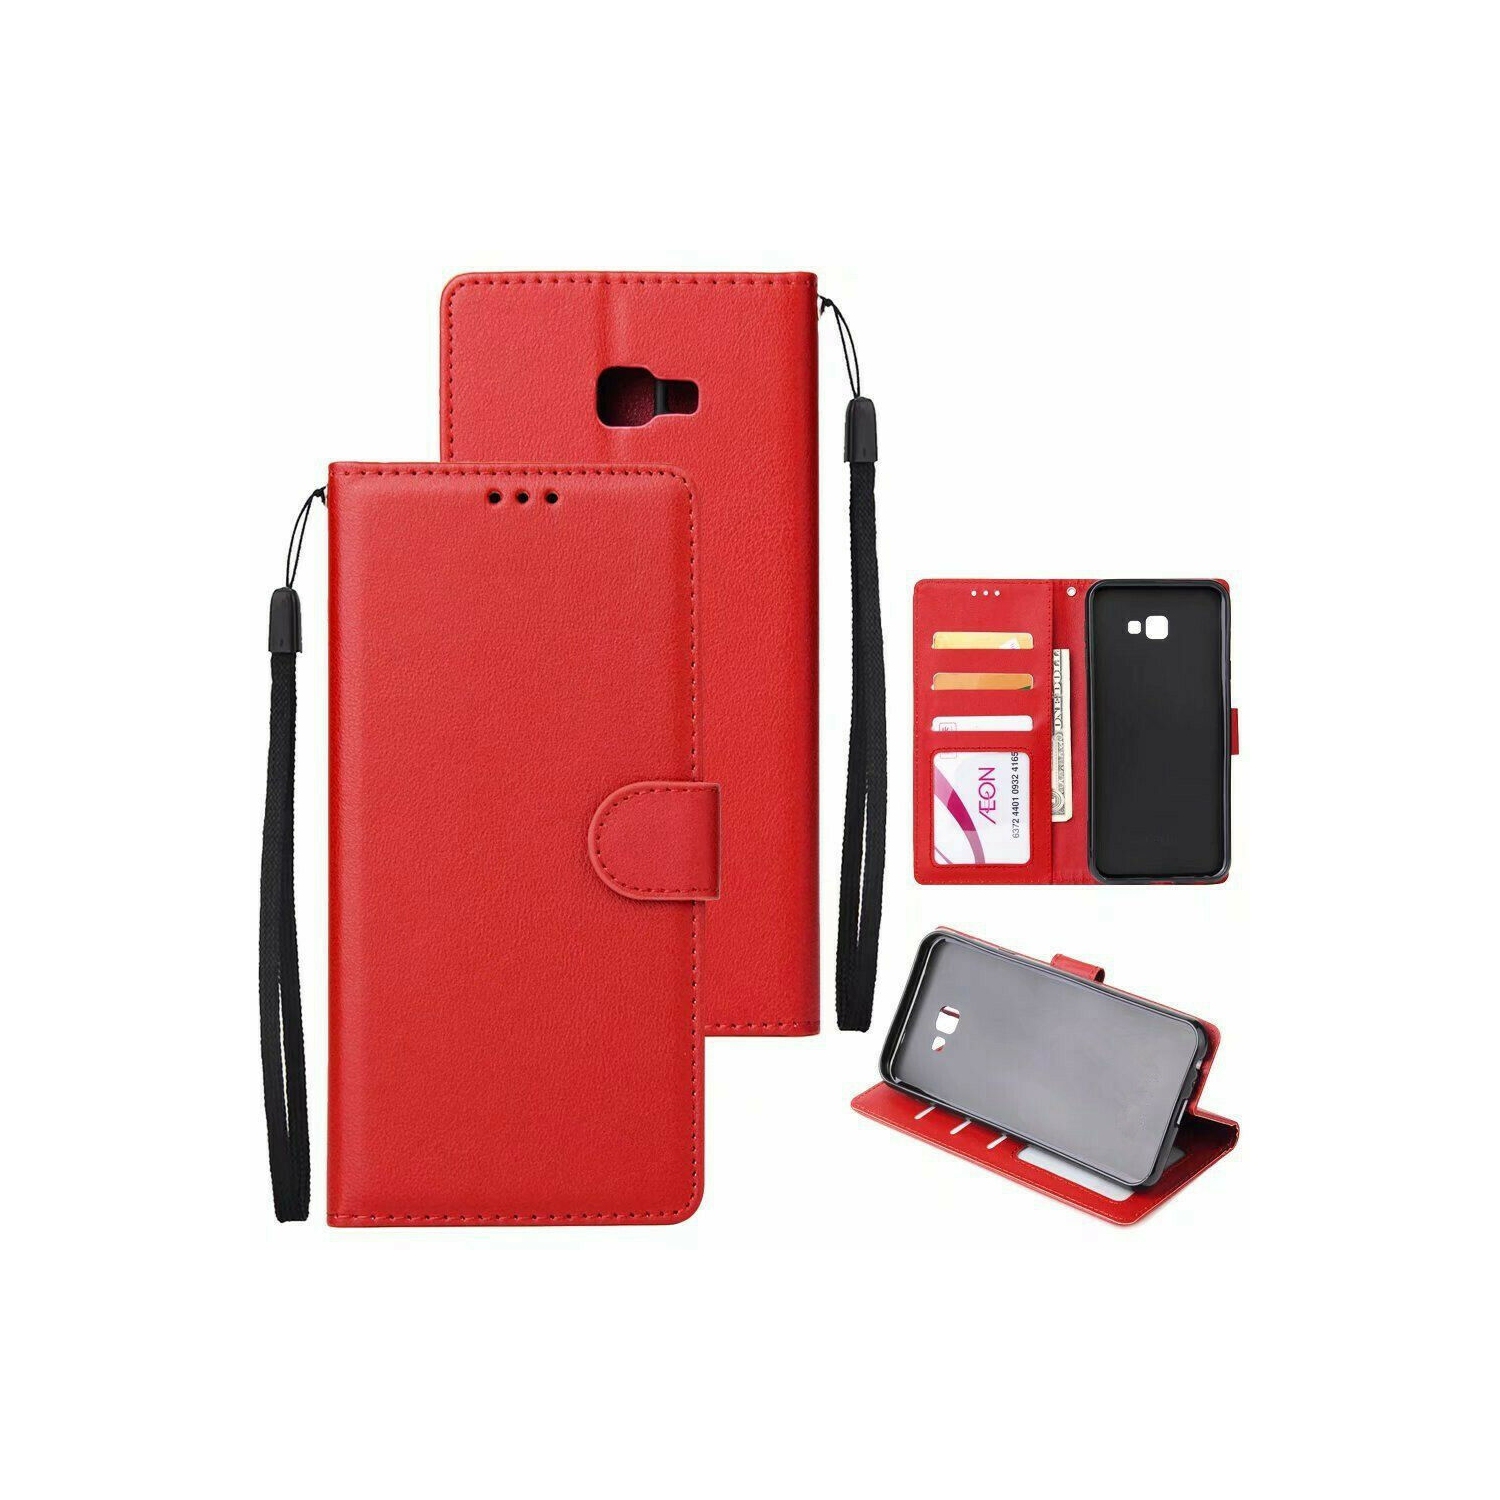 【CSmart】 Magnetic Card Slot Leather Folio Wallet Flip Case Cover for Samsung Galaxy J3 Prime / Galaxy J3 2017, Red